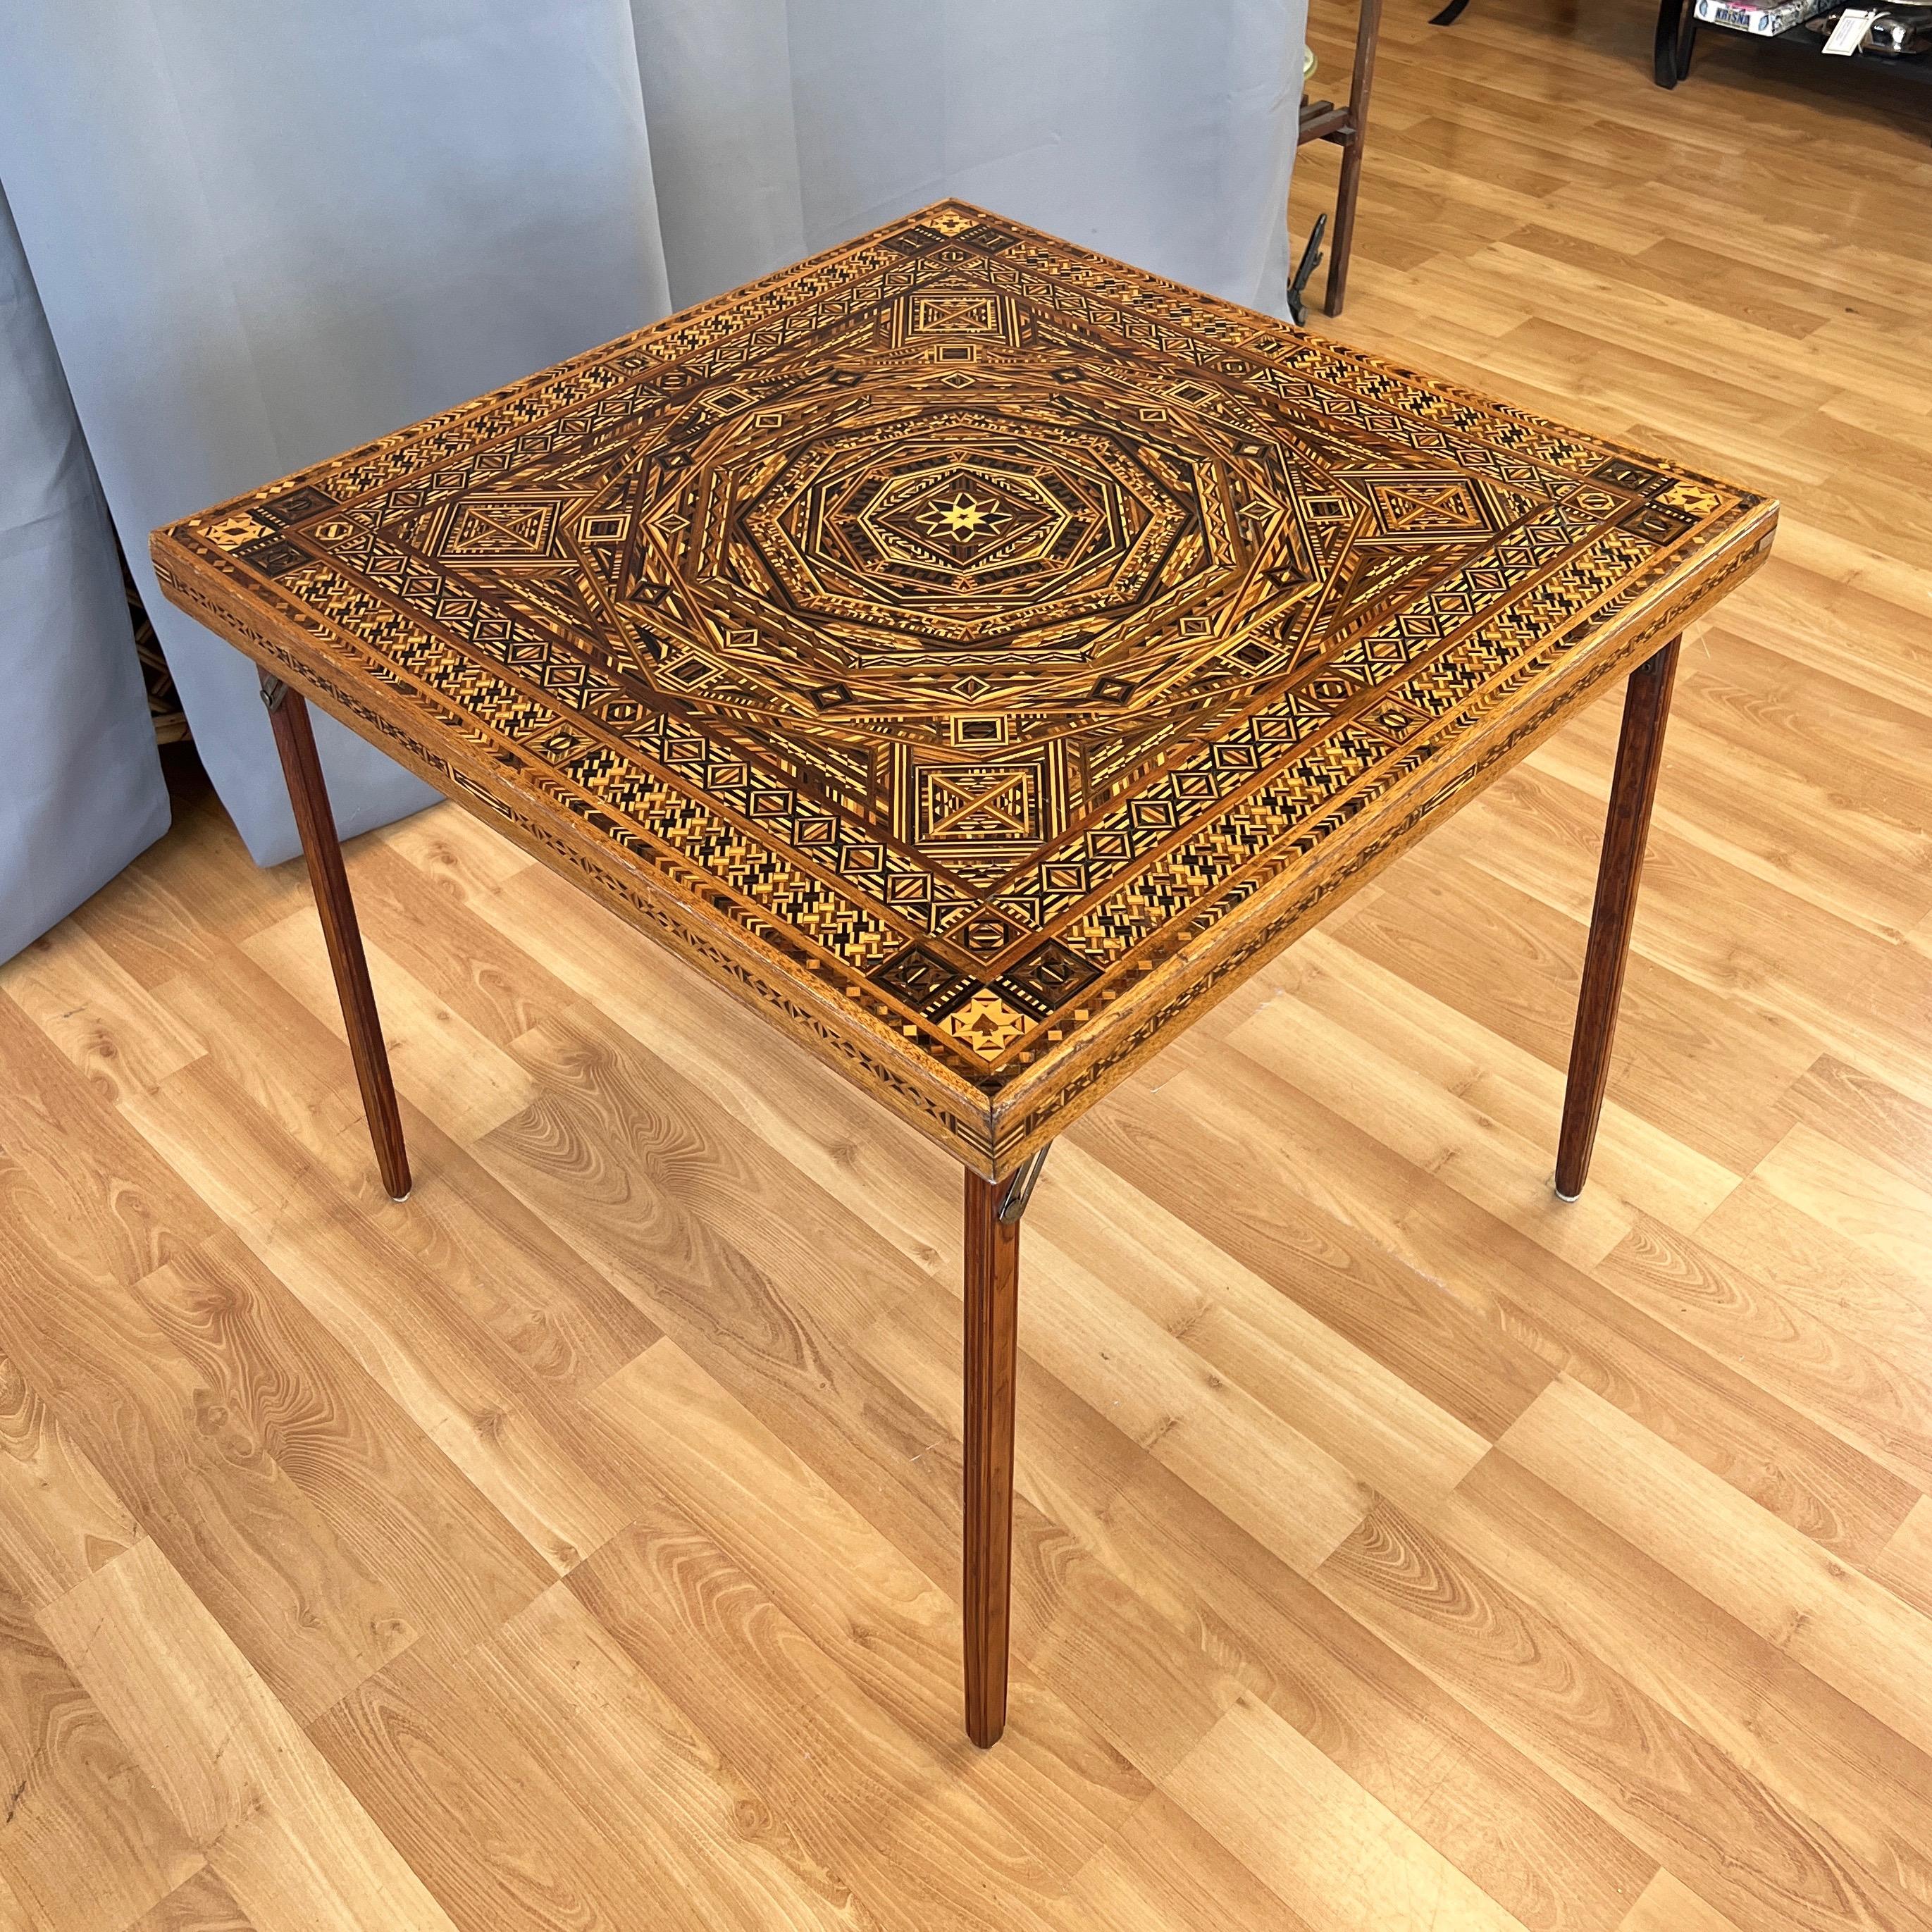 Moorish Syrian-Style Exceptionally Intricate Wood Marquetry Folding Card Table, 1930s For Sale